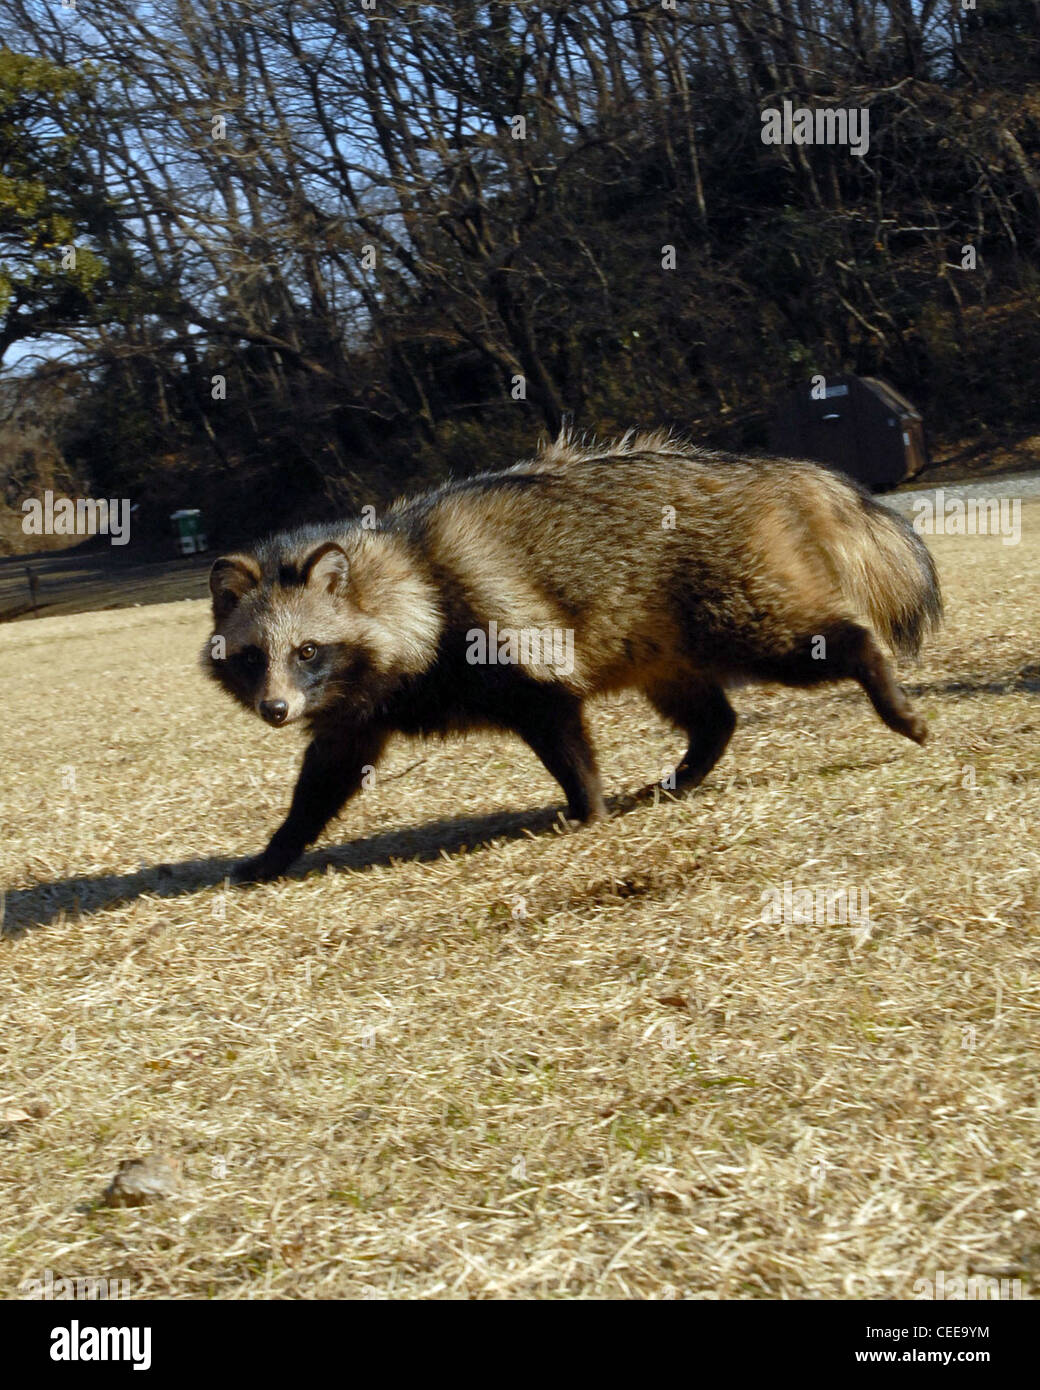 This raccoon dog was captured Jan. 6 on base and released Jan. 8 in a forest at the Tama Hills Recreation Area on Yokota Air Base, Japan. Members of the 374th Civil Engineer Squadron pest management office are responsible for catching and relocating wild animals found on the base, keeping the airfield clear and the pet population safe. Stock Photo